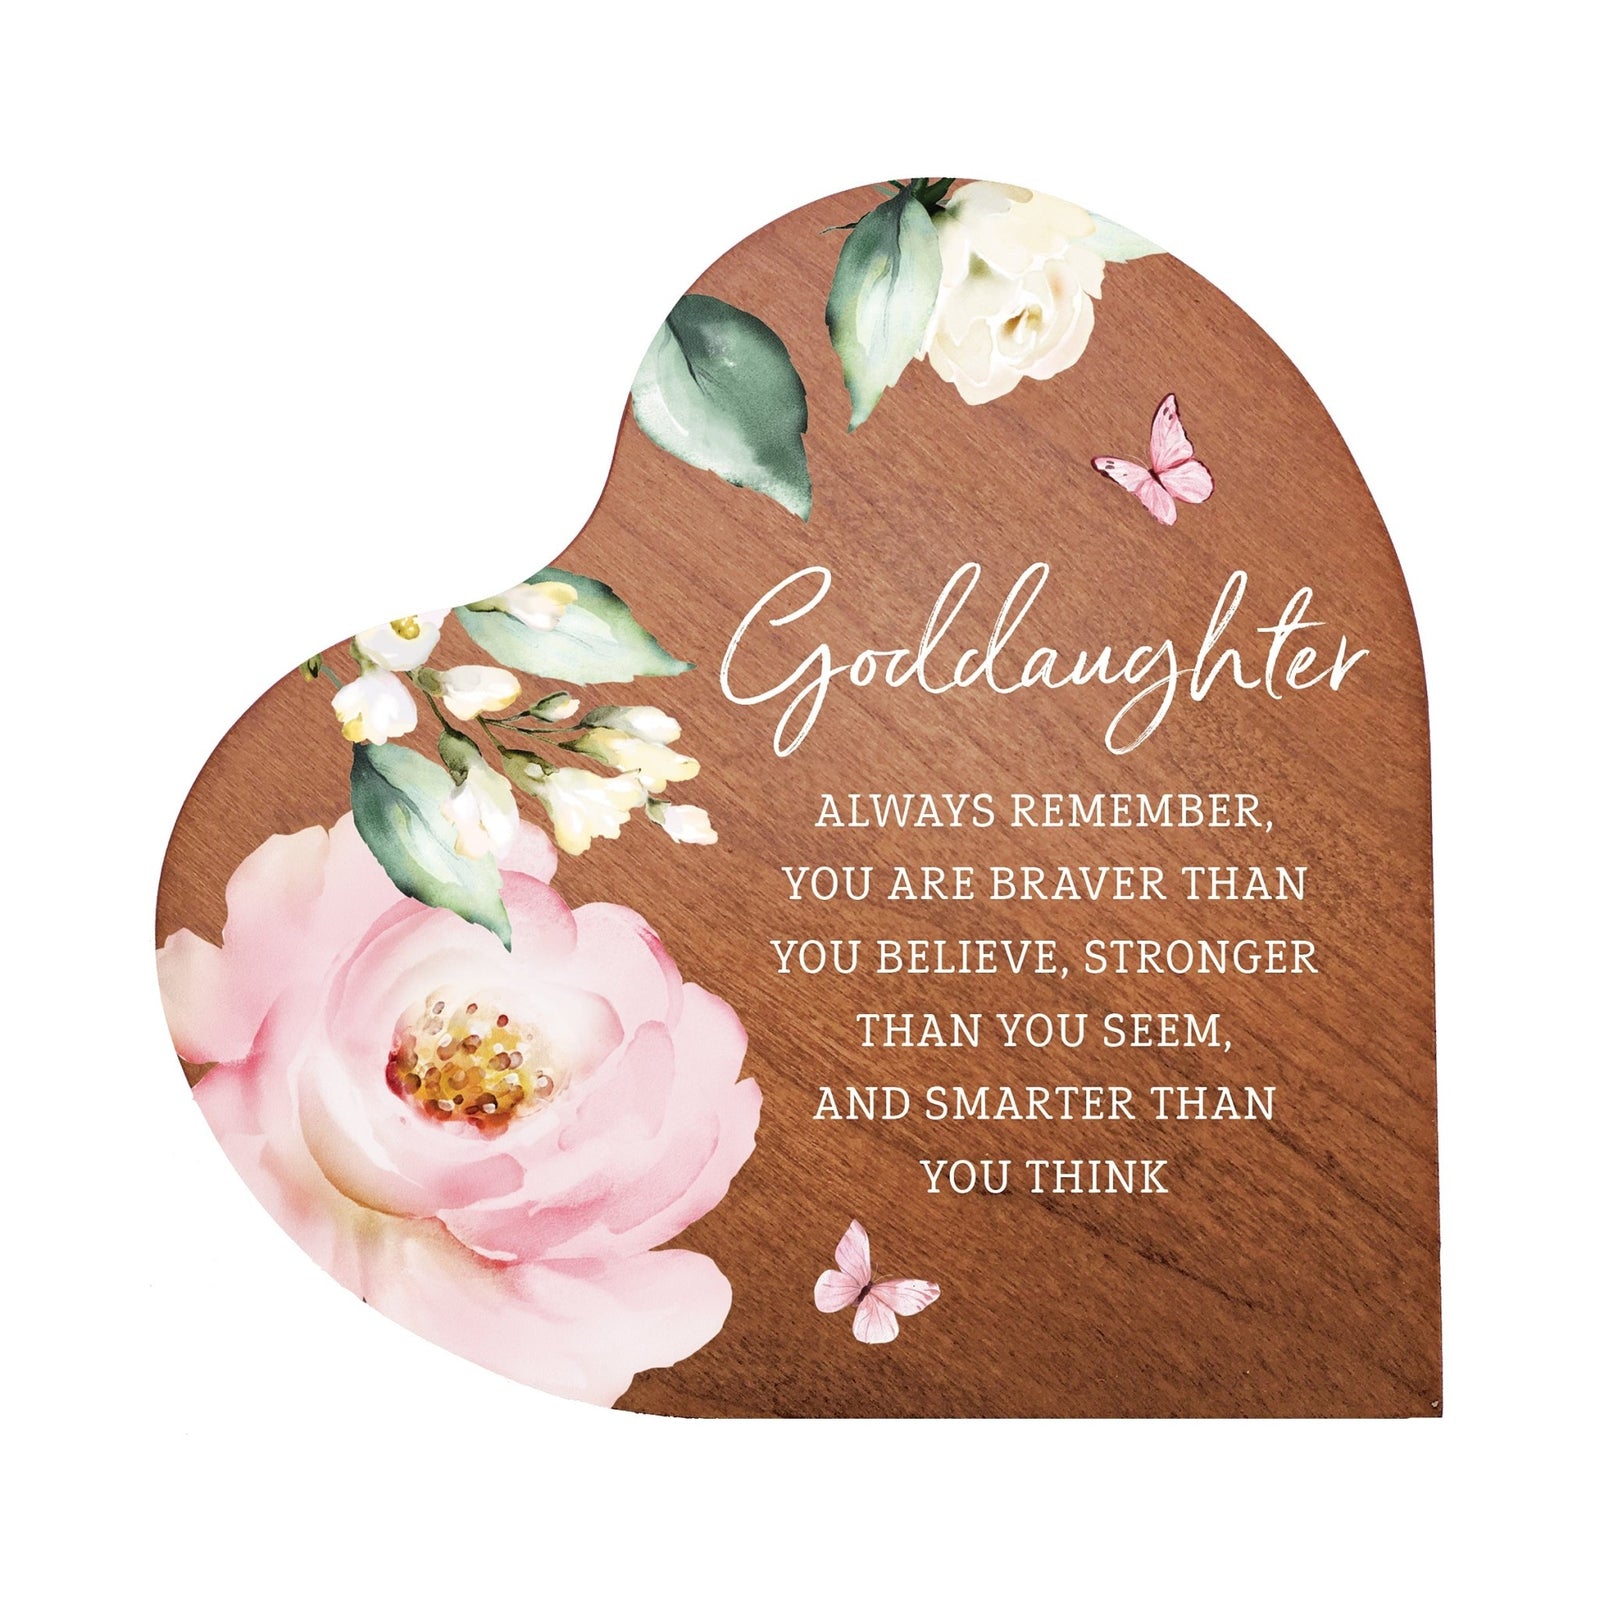 Modern Daughter and Mother’s Love Heart Block 5in with Inspirational verse - GodDaughter Always Remember - LifeSong Milestones